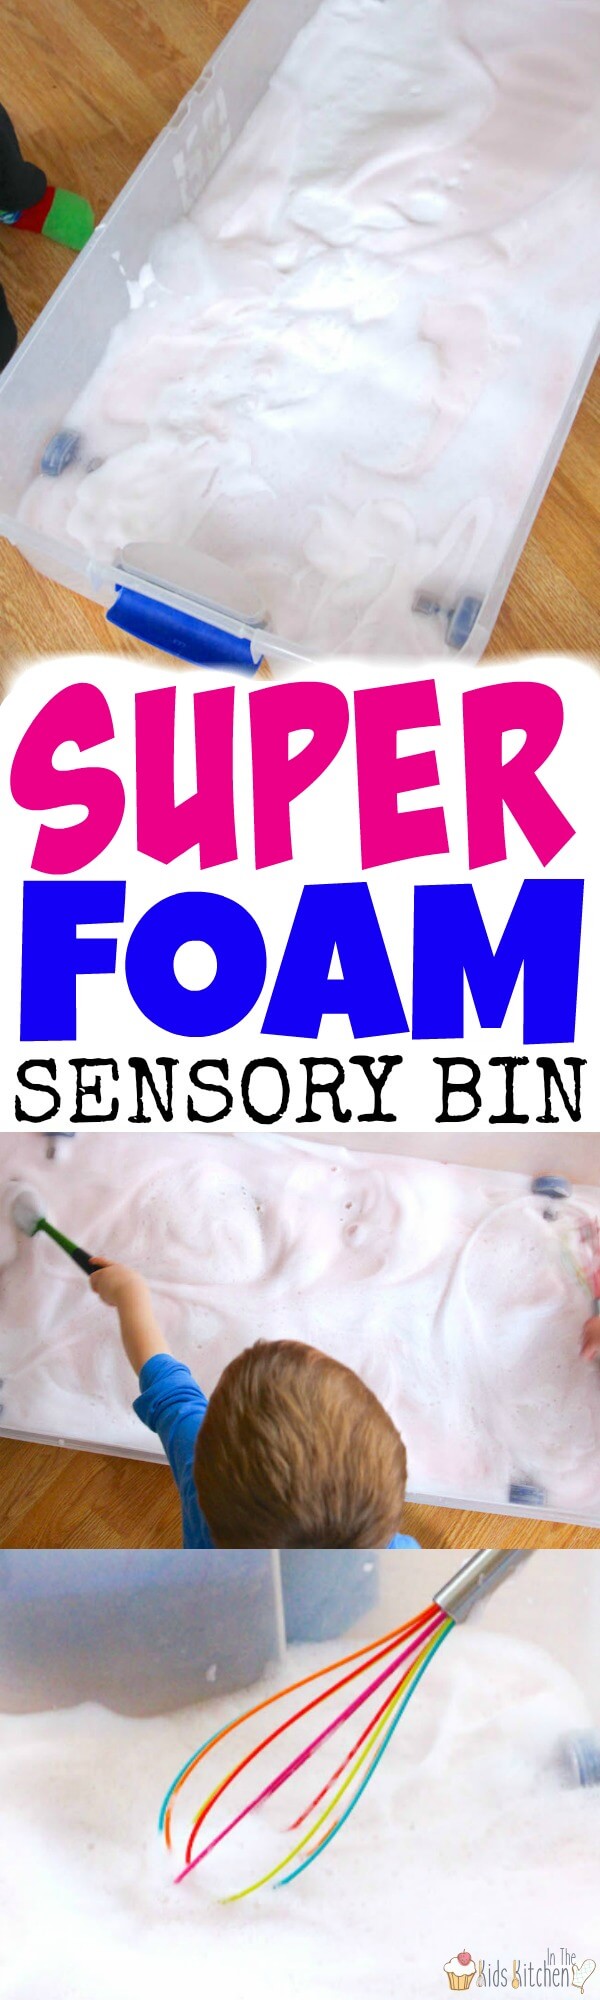 Easy set-up, virtually mess free, and quick clean up make this Soap Foam Sensory Bin an awesome indoor kids activity! Keep 'em busy for hours of clean play!